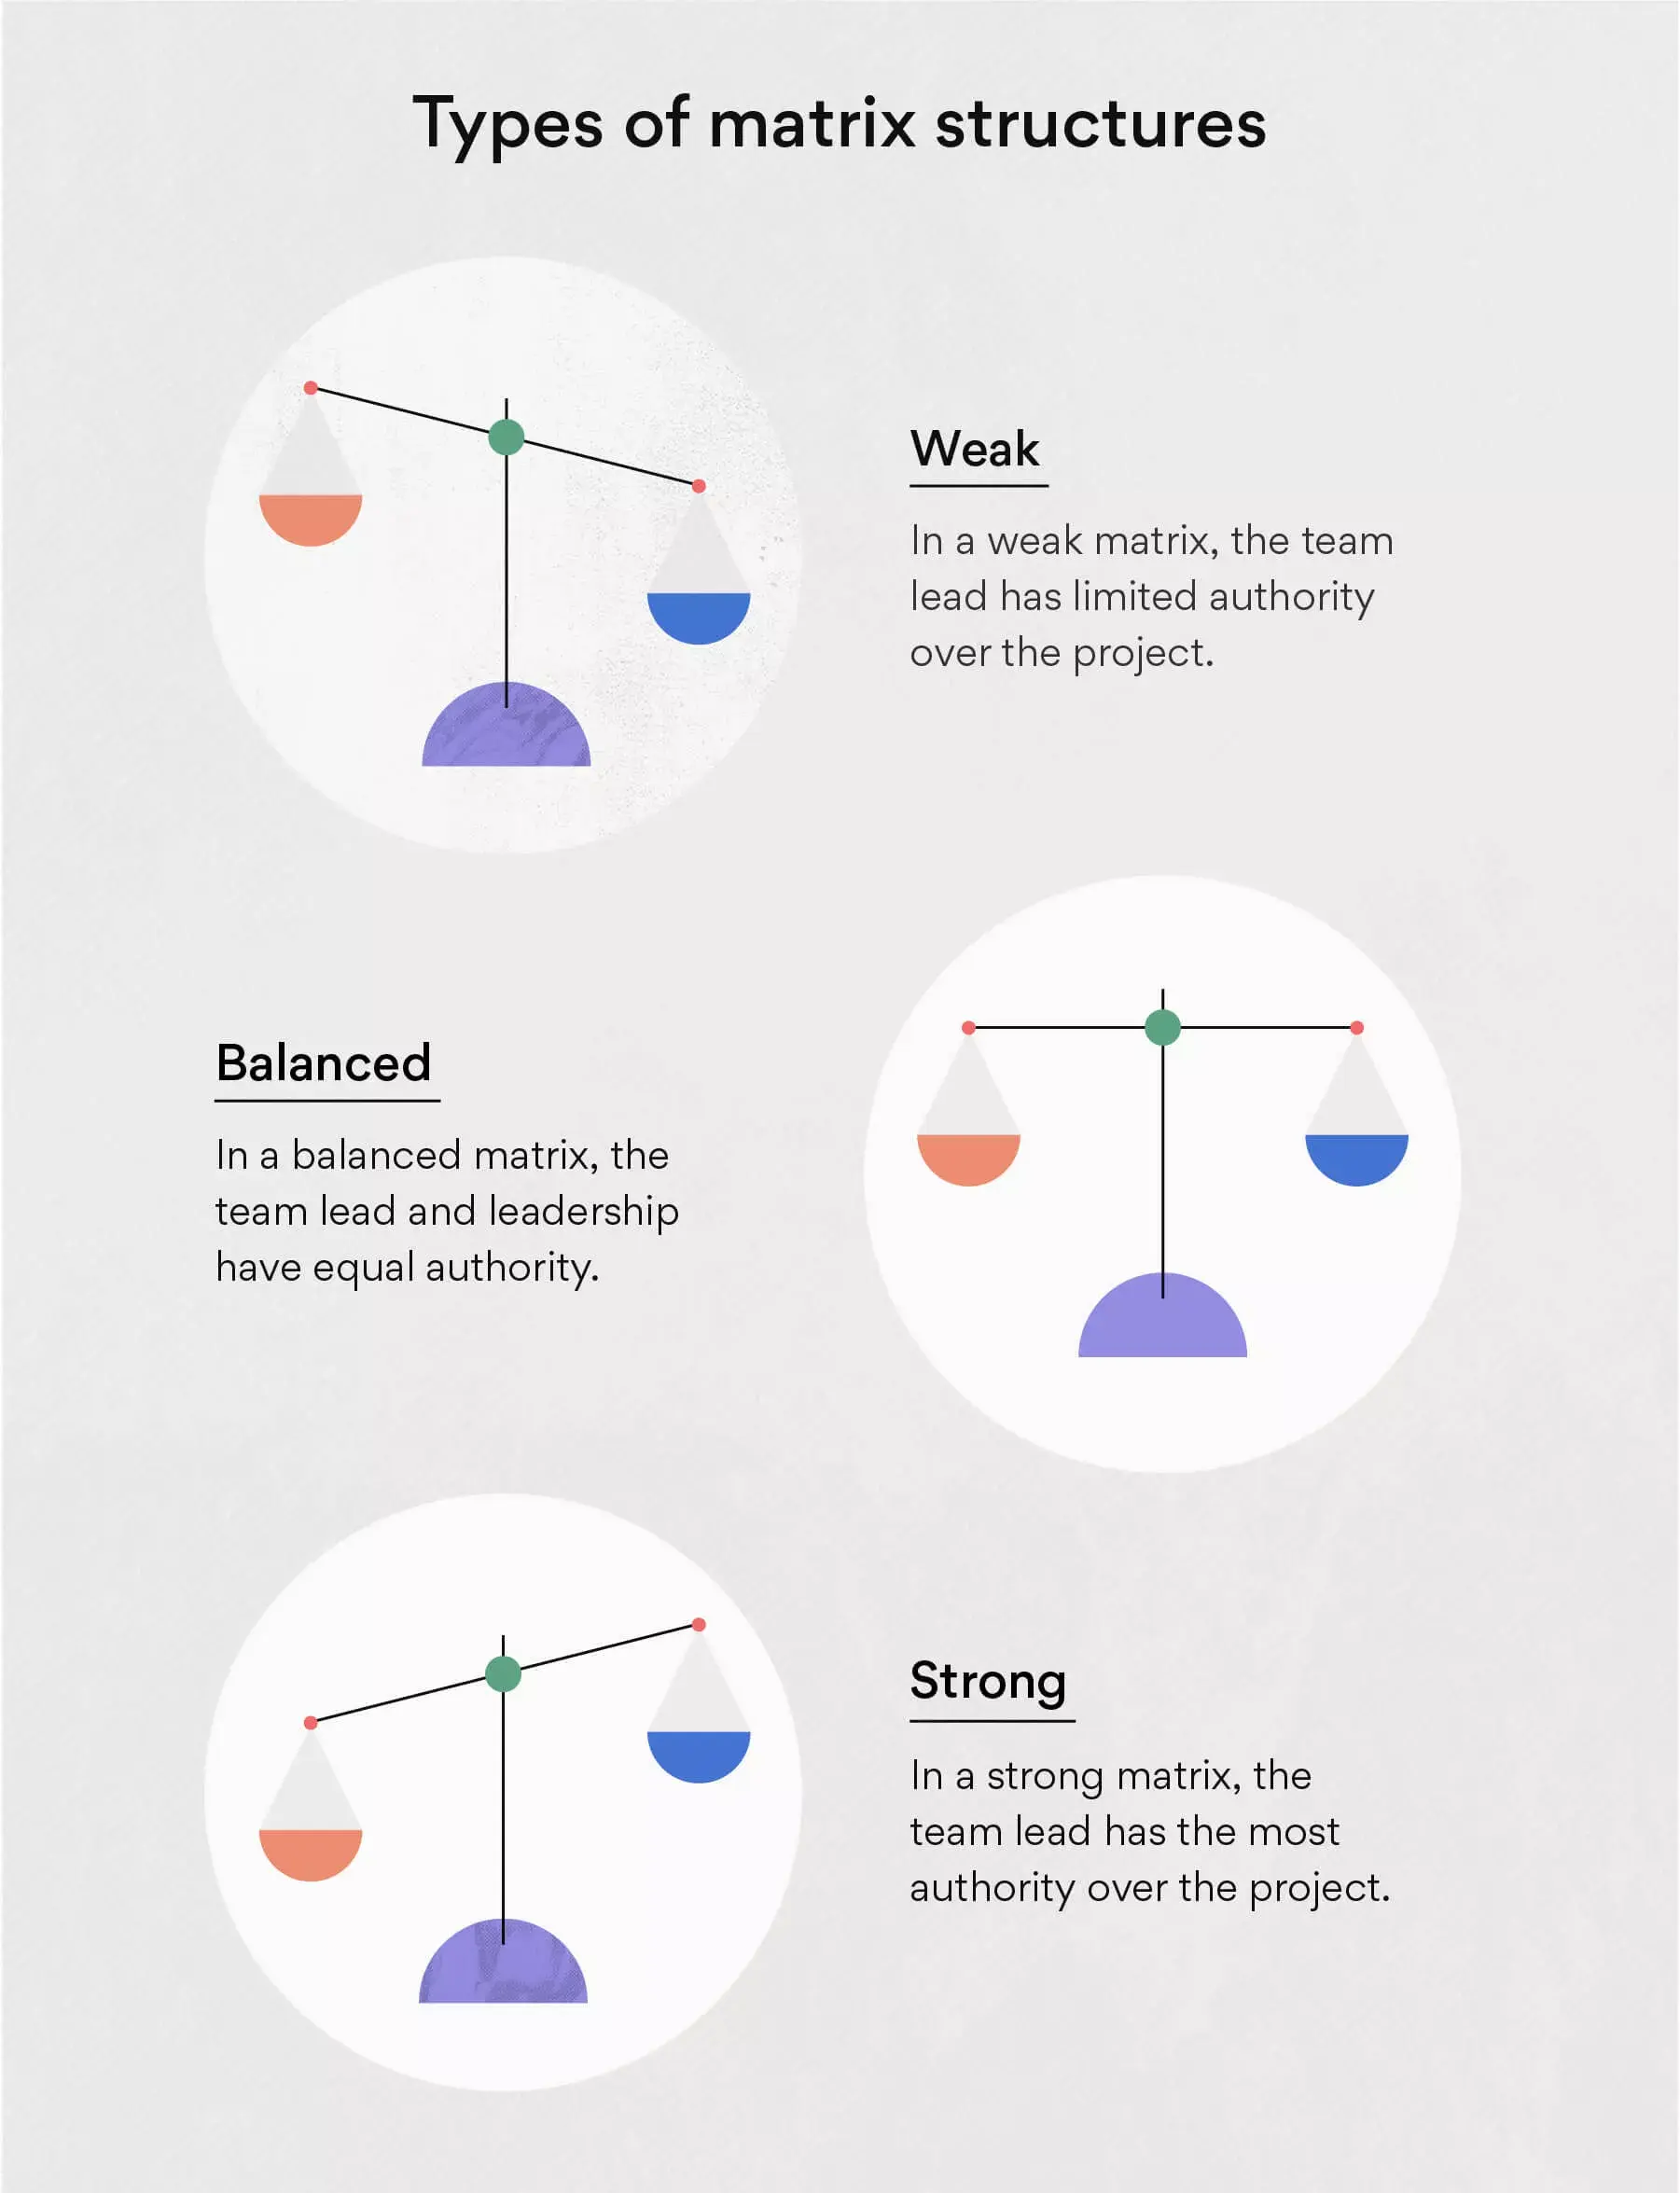 [inline illustration] Types of matrix structures (infographic)